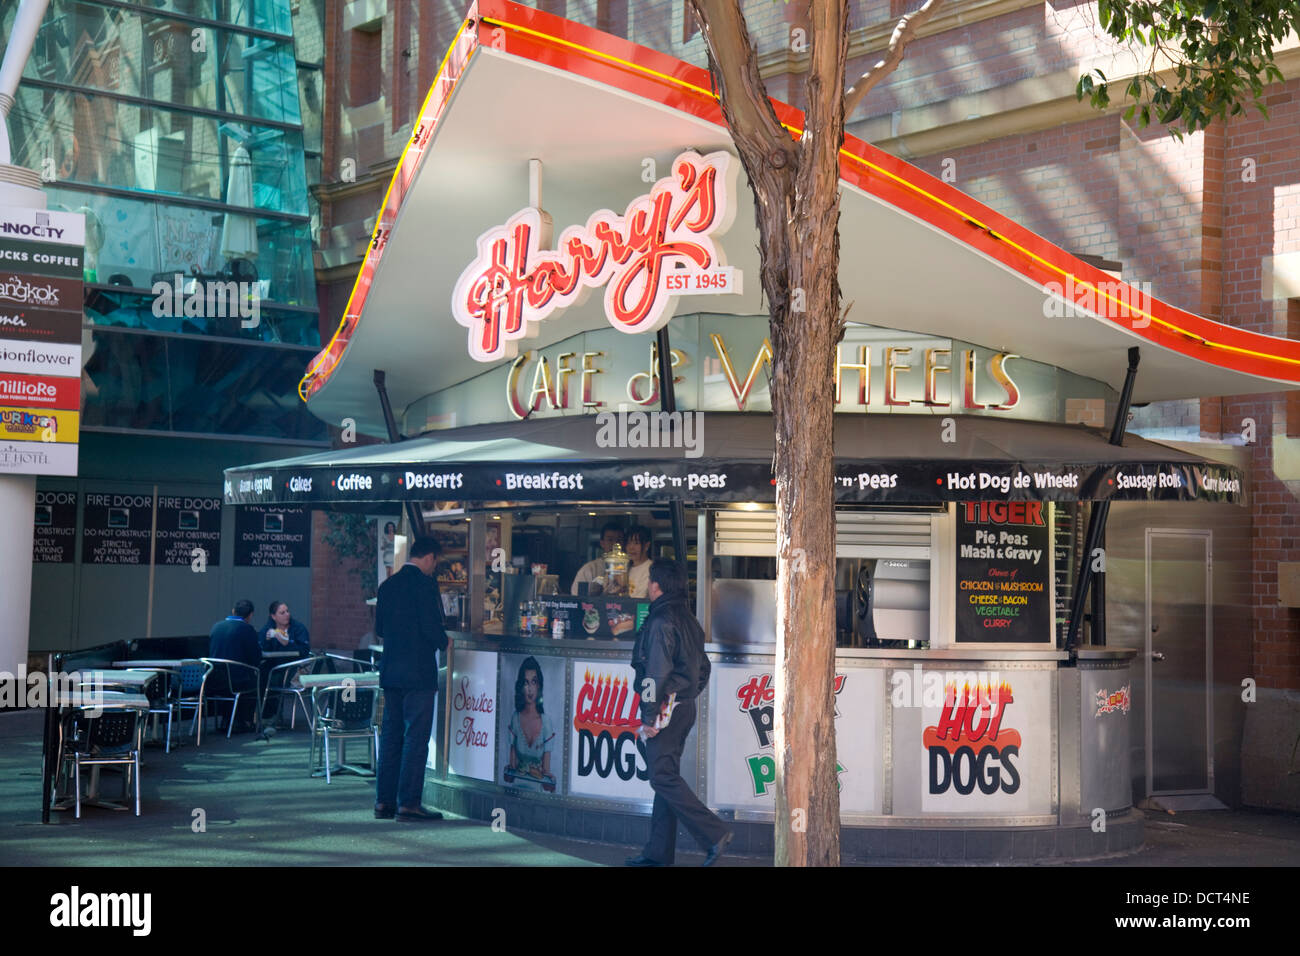 Harrys cafe de wheels hi-res stock photography and images - Alamy